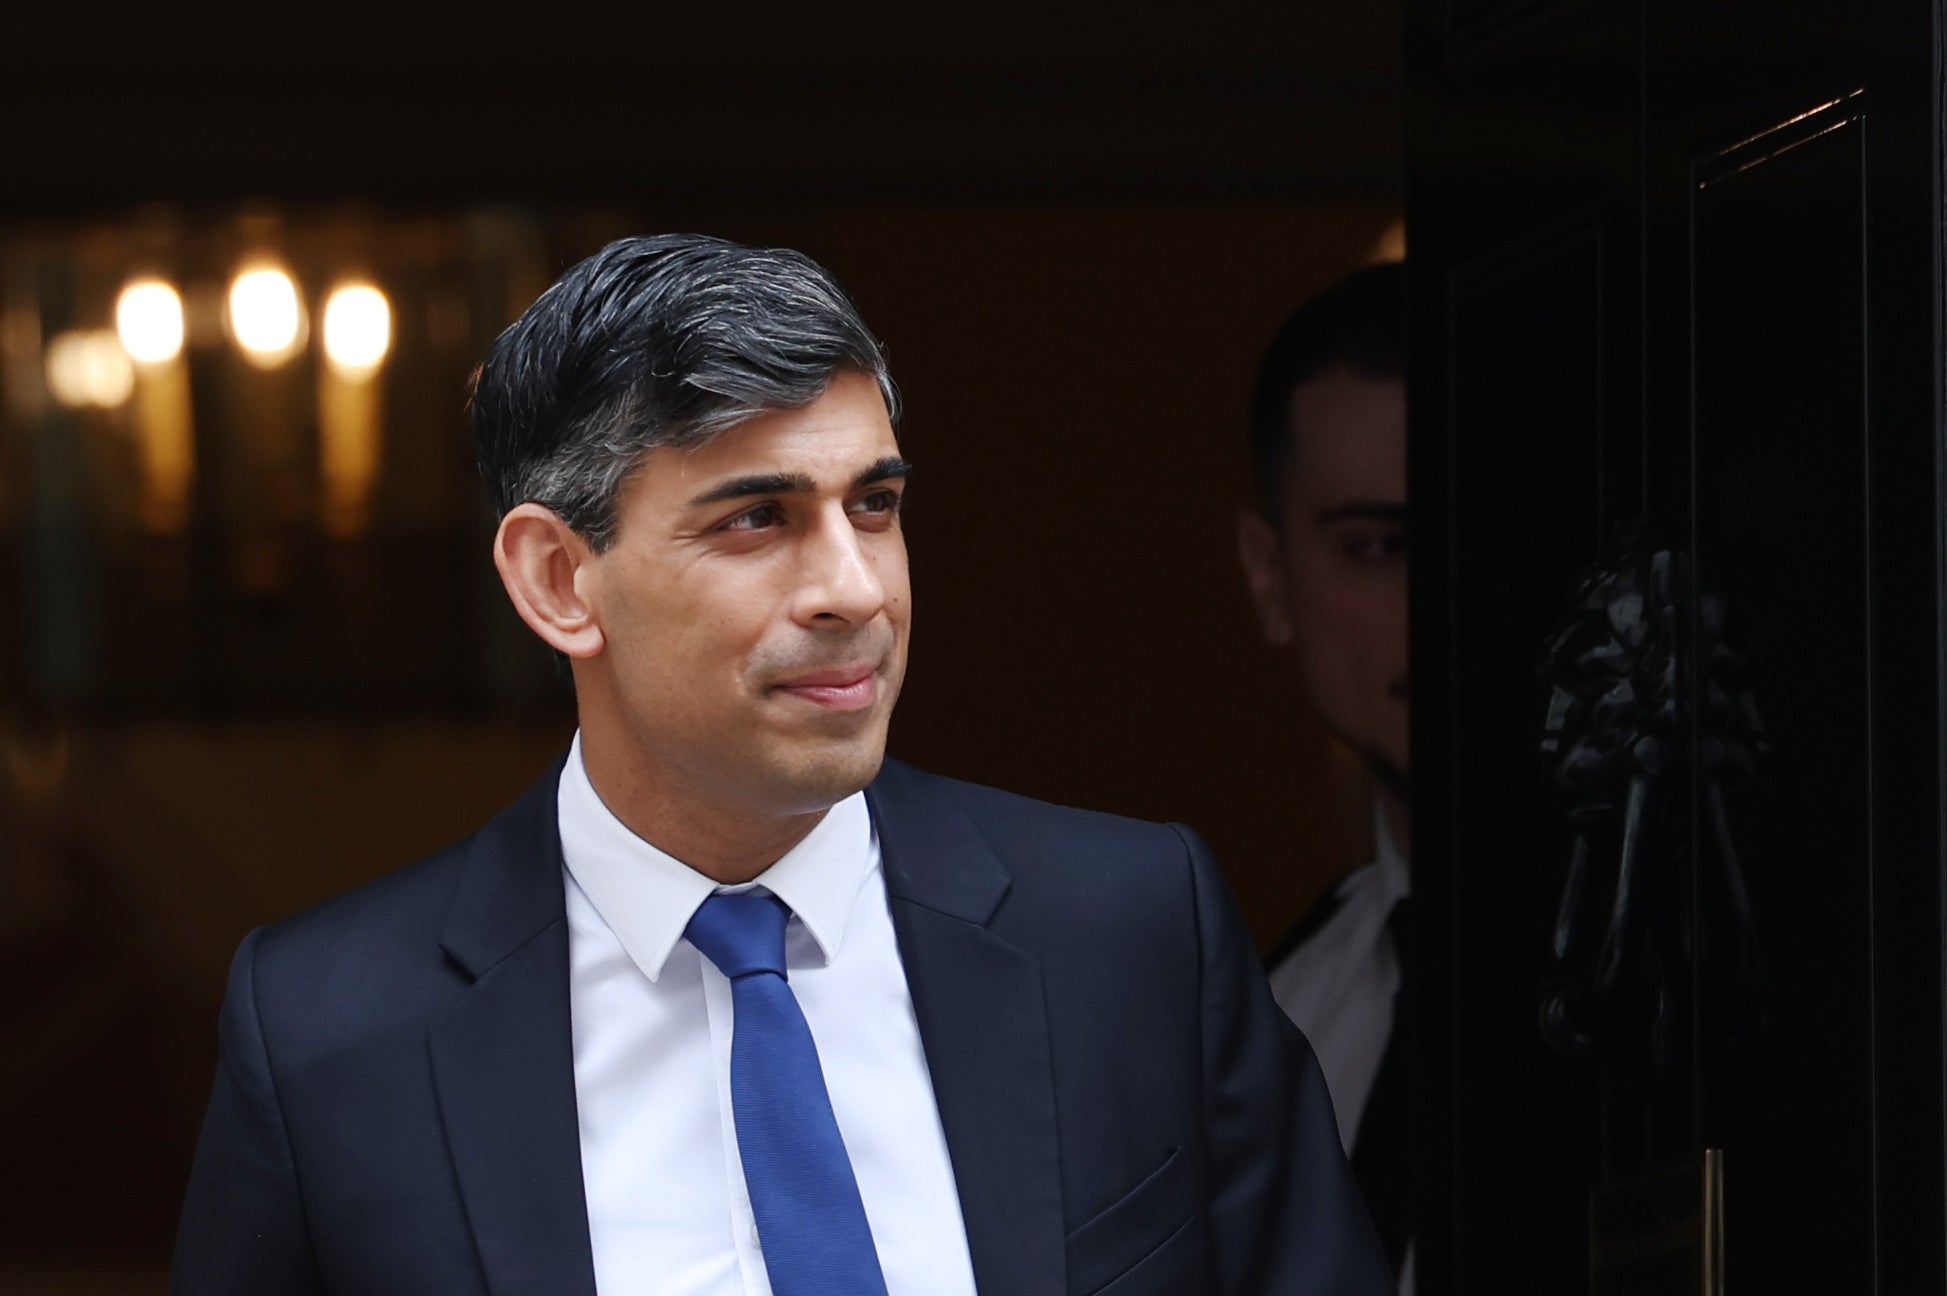 Rishi Sunak said the situation in Gaza is growing ‘increasingly intolerable’